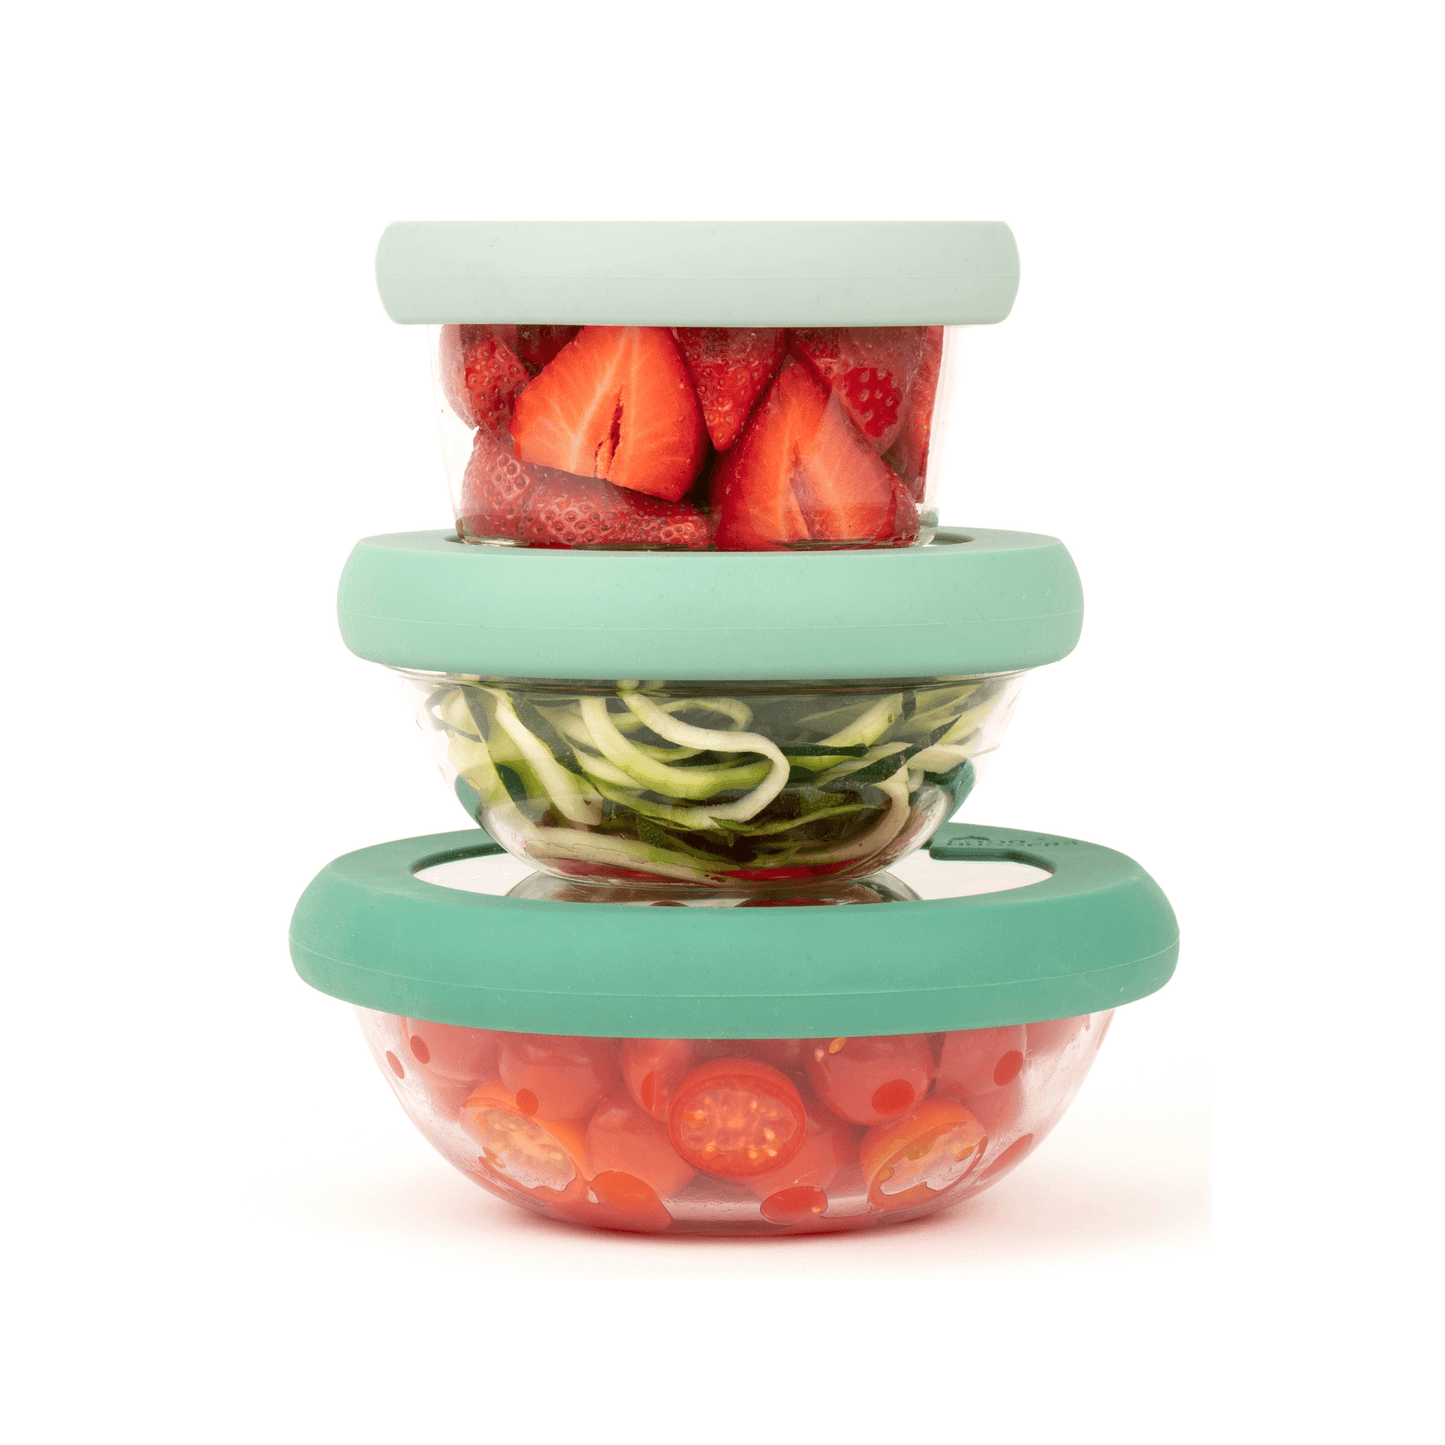 Three glass bowls one on top of the other, with BPA-free silicone green lids that preserve fruits and vegetables